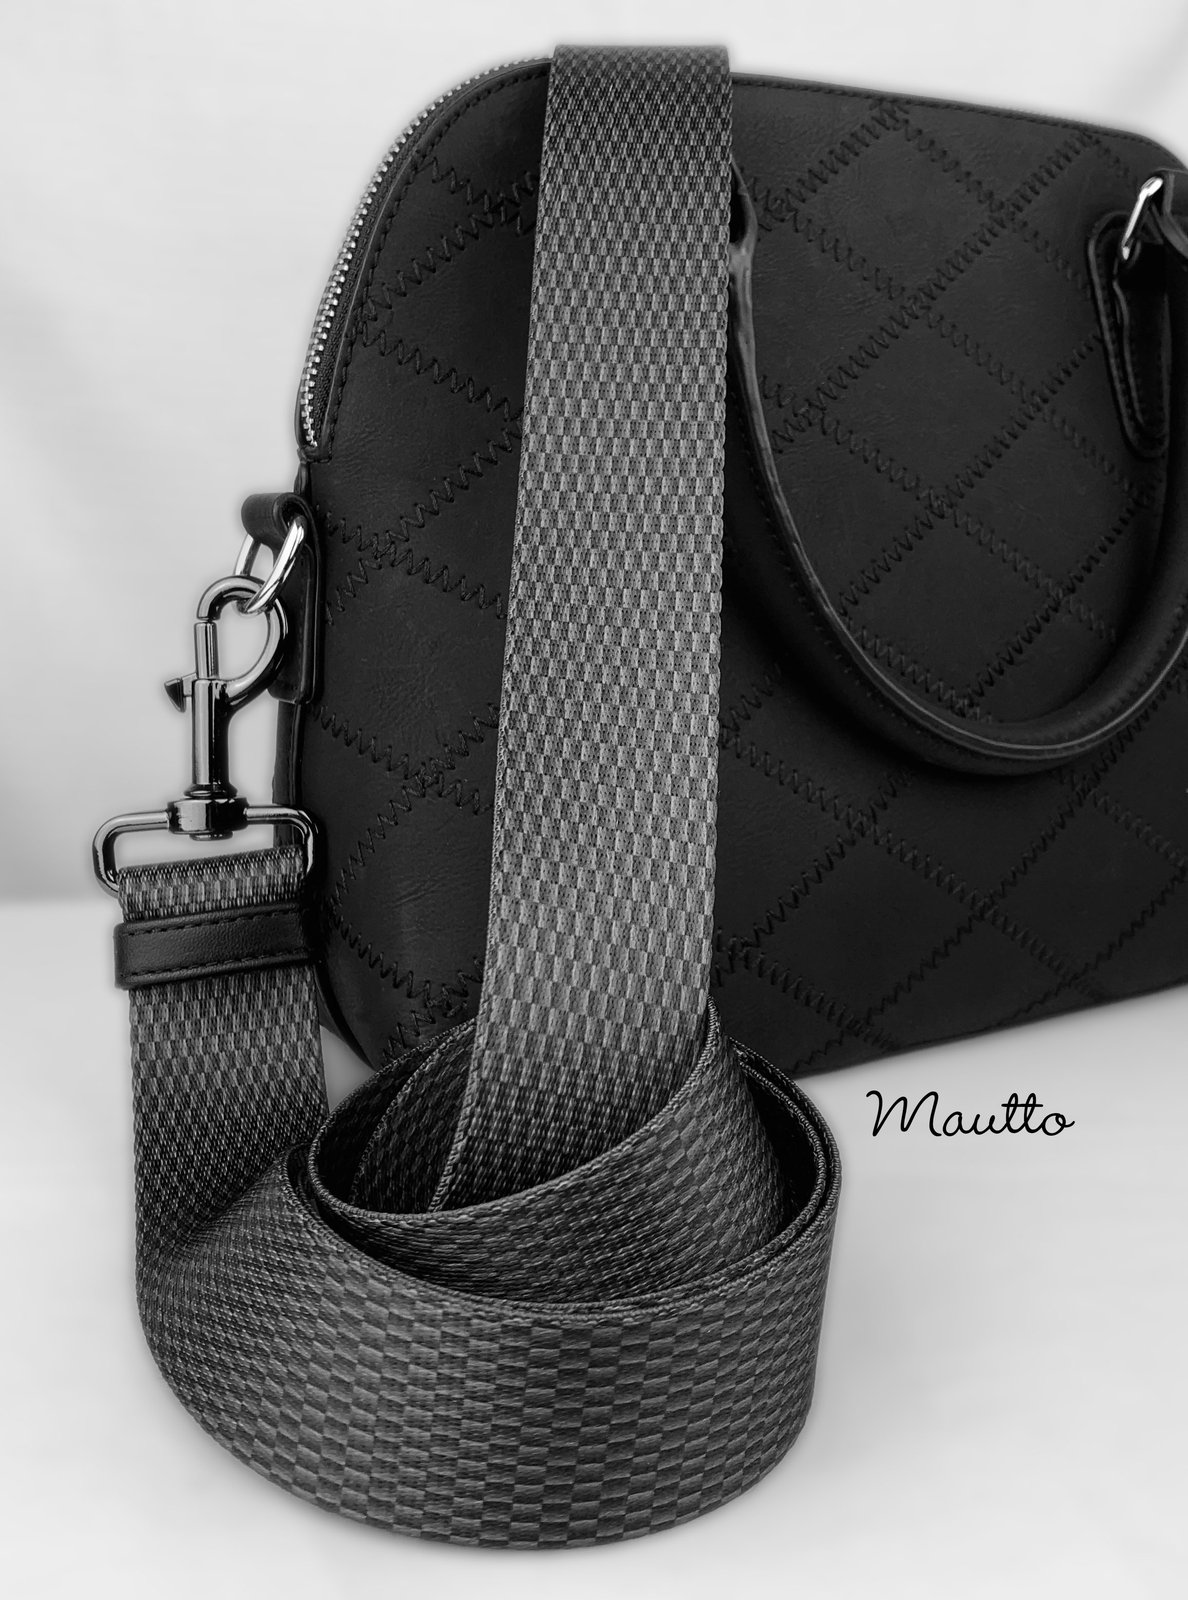 Harley Saddle Bags with Lids | Carbon Fiber - DME Racing